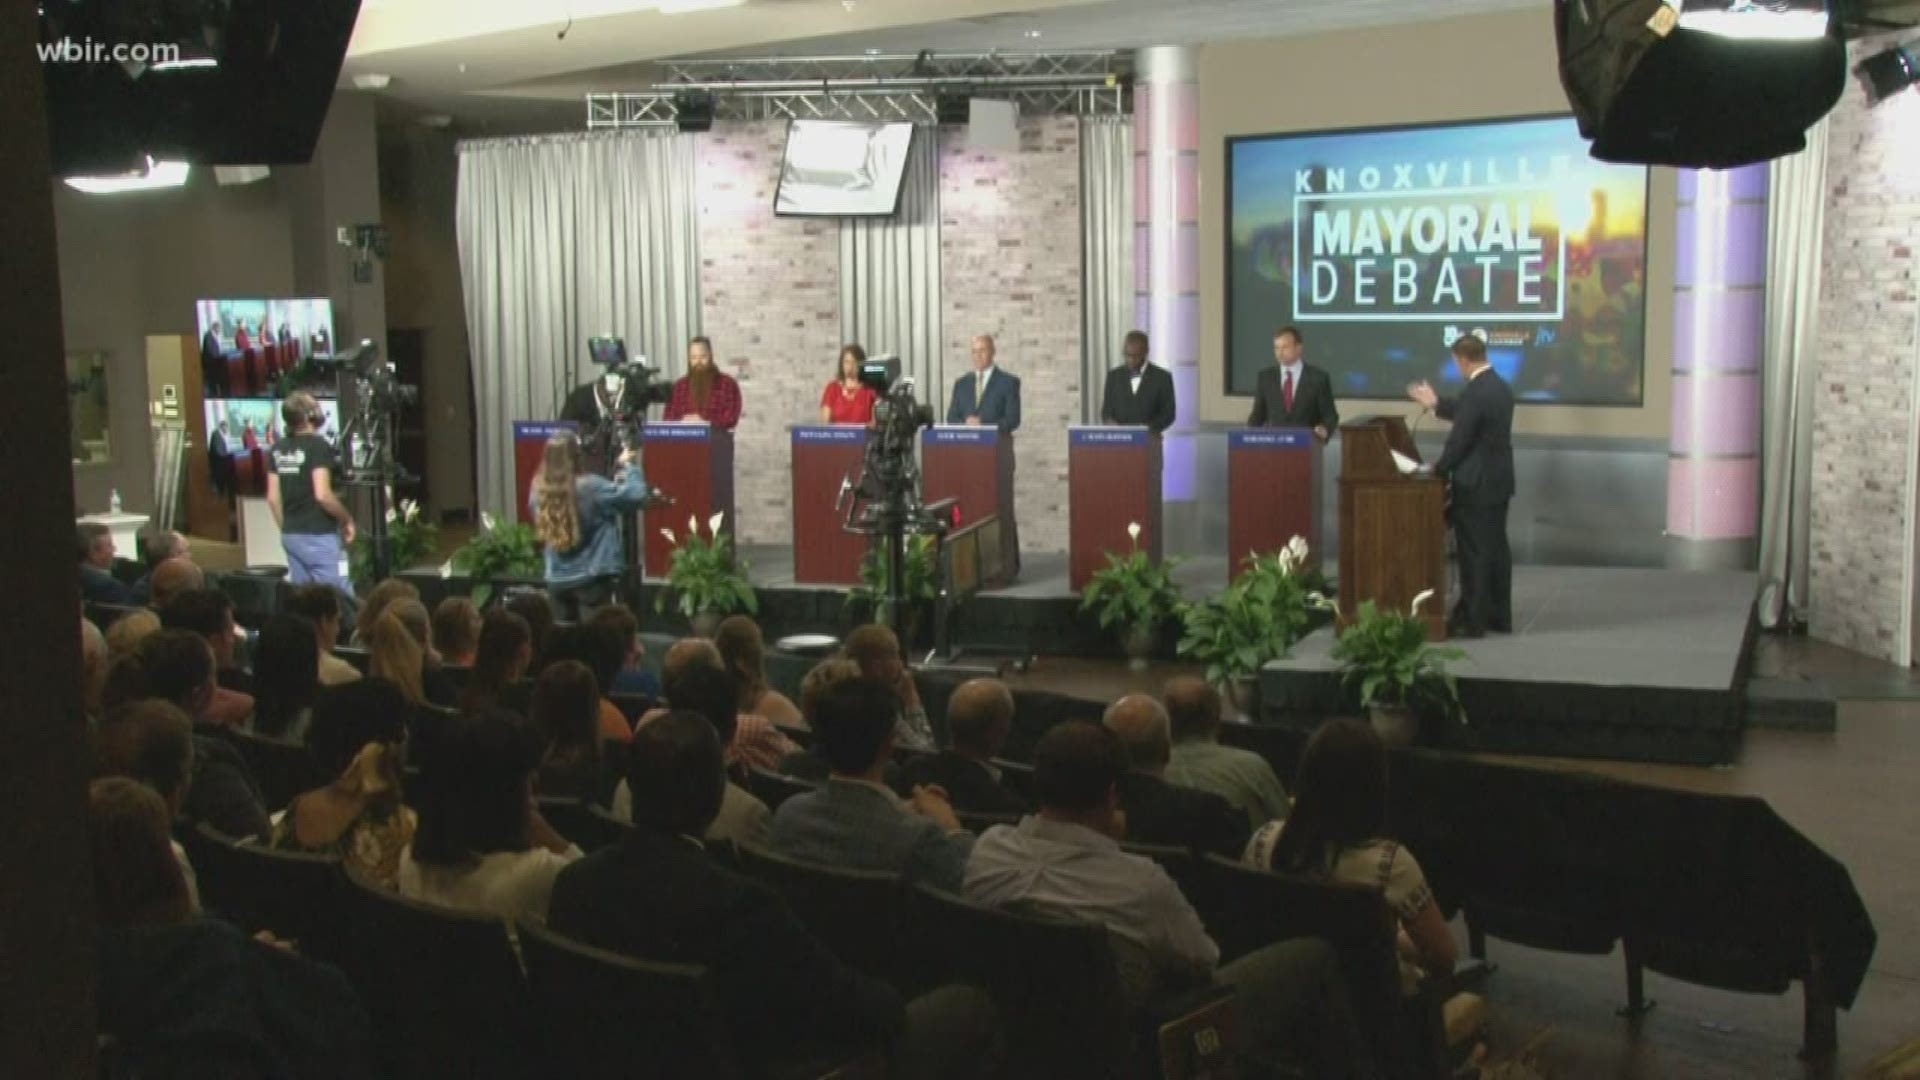 The six mayoral candidates compete as Knoxville prepares to elect a new mayor for the first time in eight years.